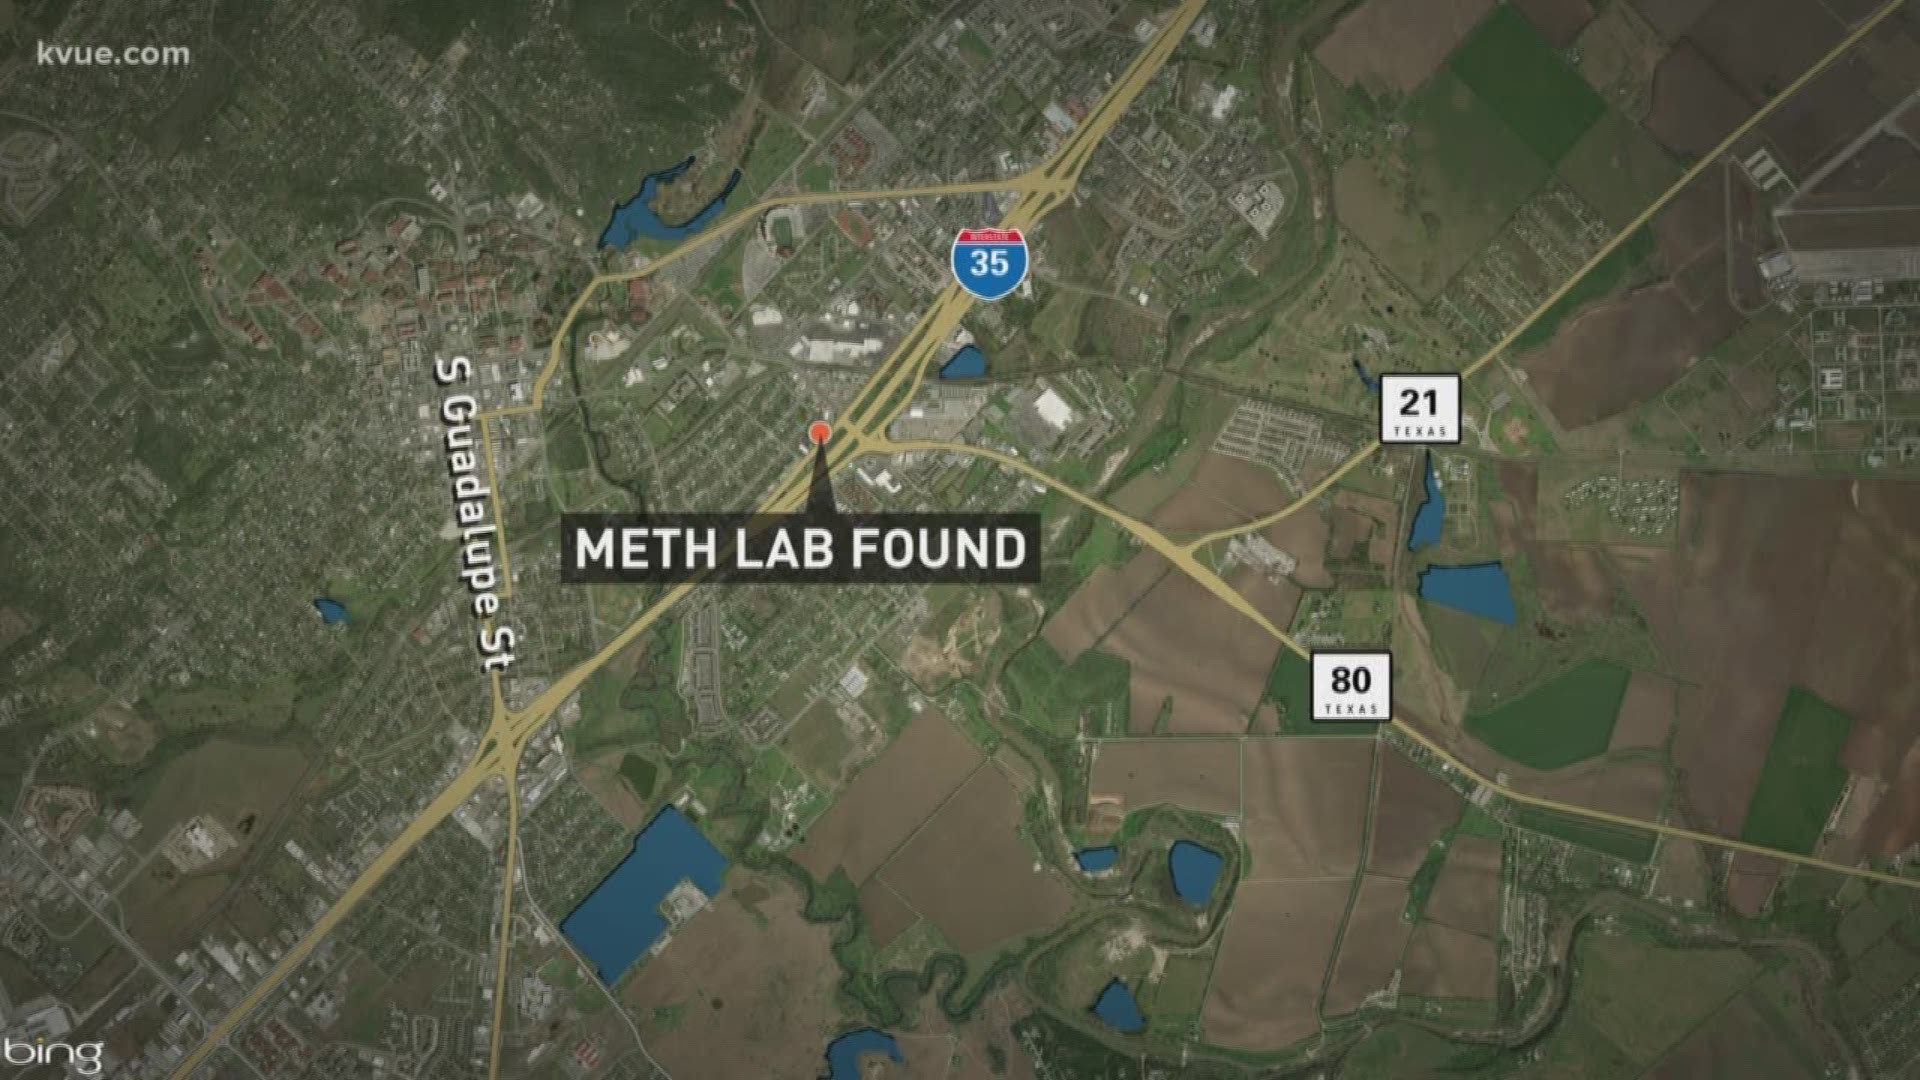 A portable meth lab was busted over the weekend at an abandoned Burger King in San Marcos.